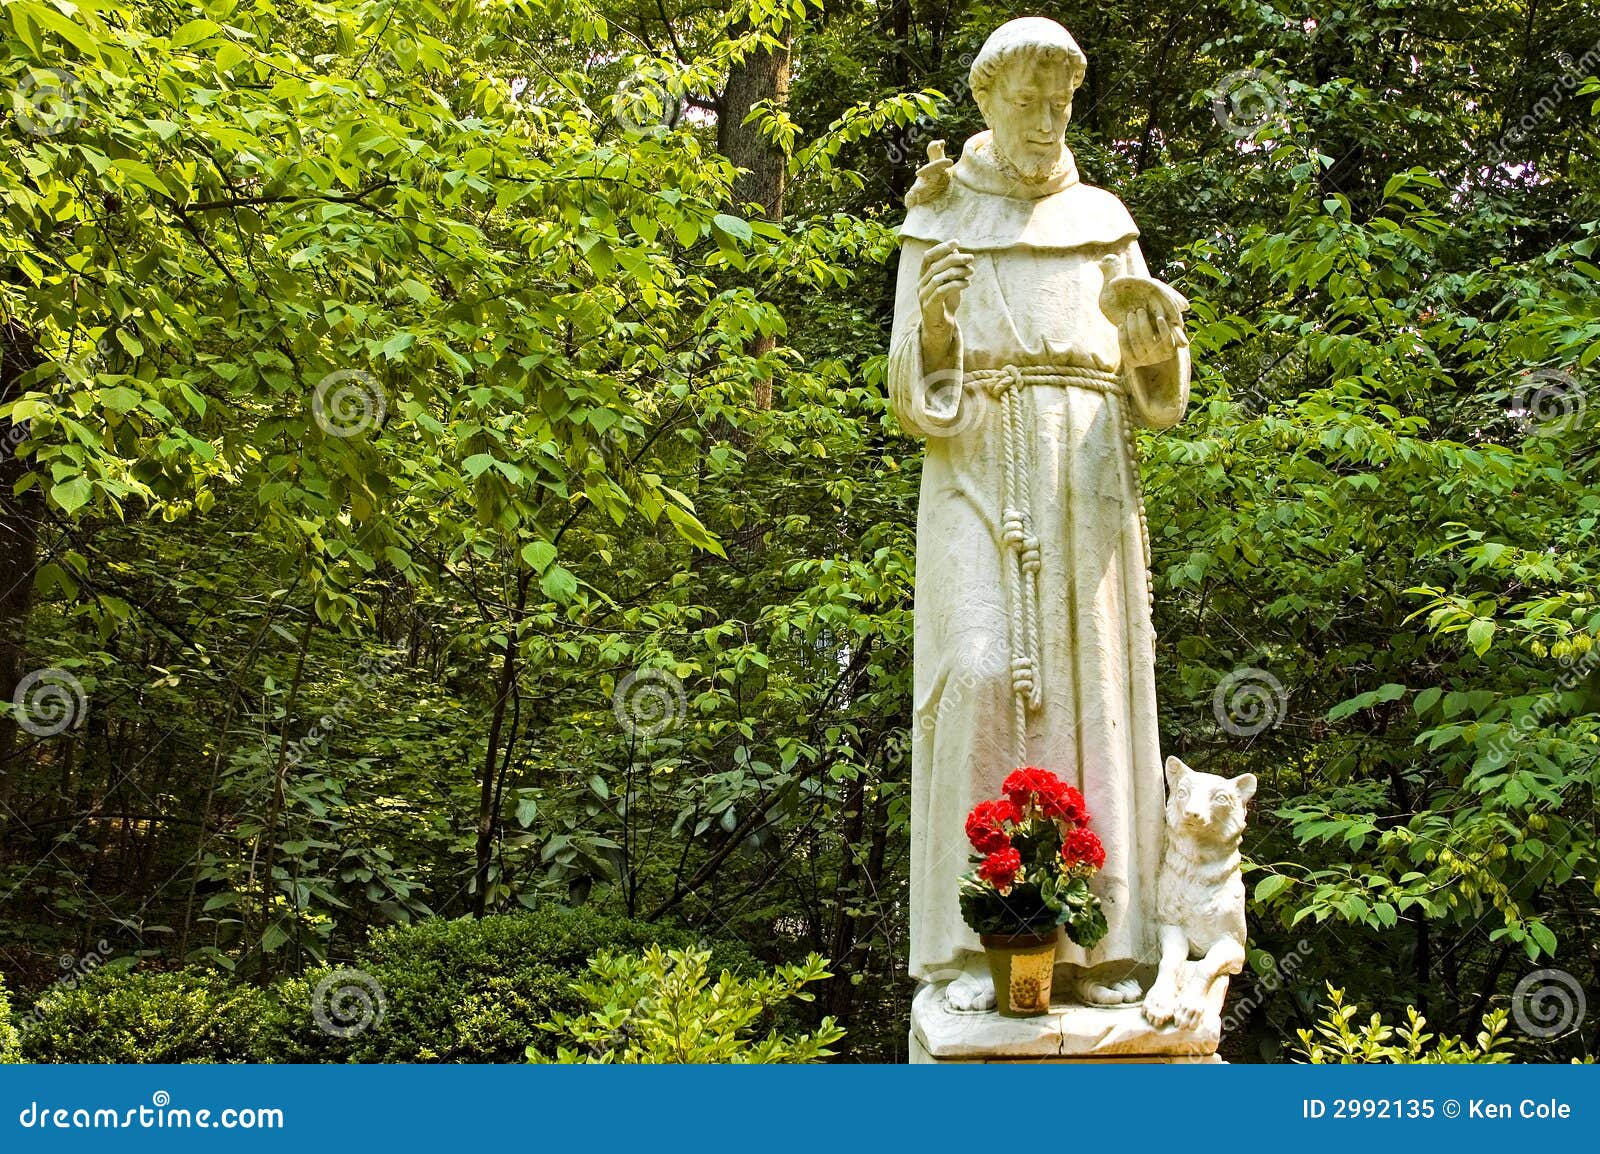 statue of st. francis